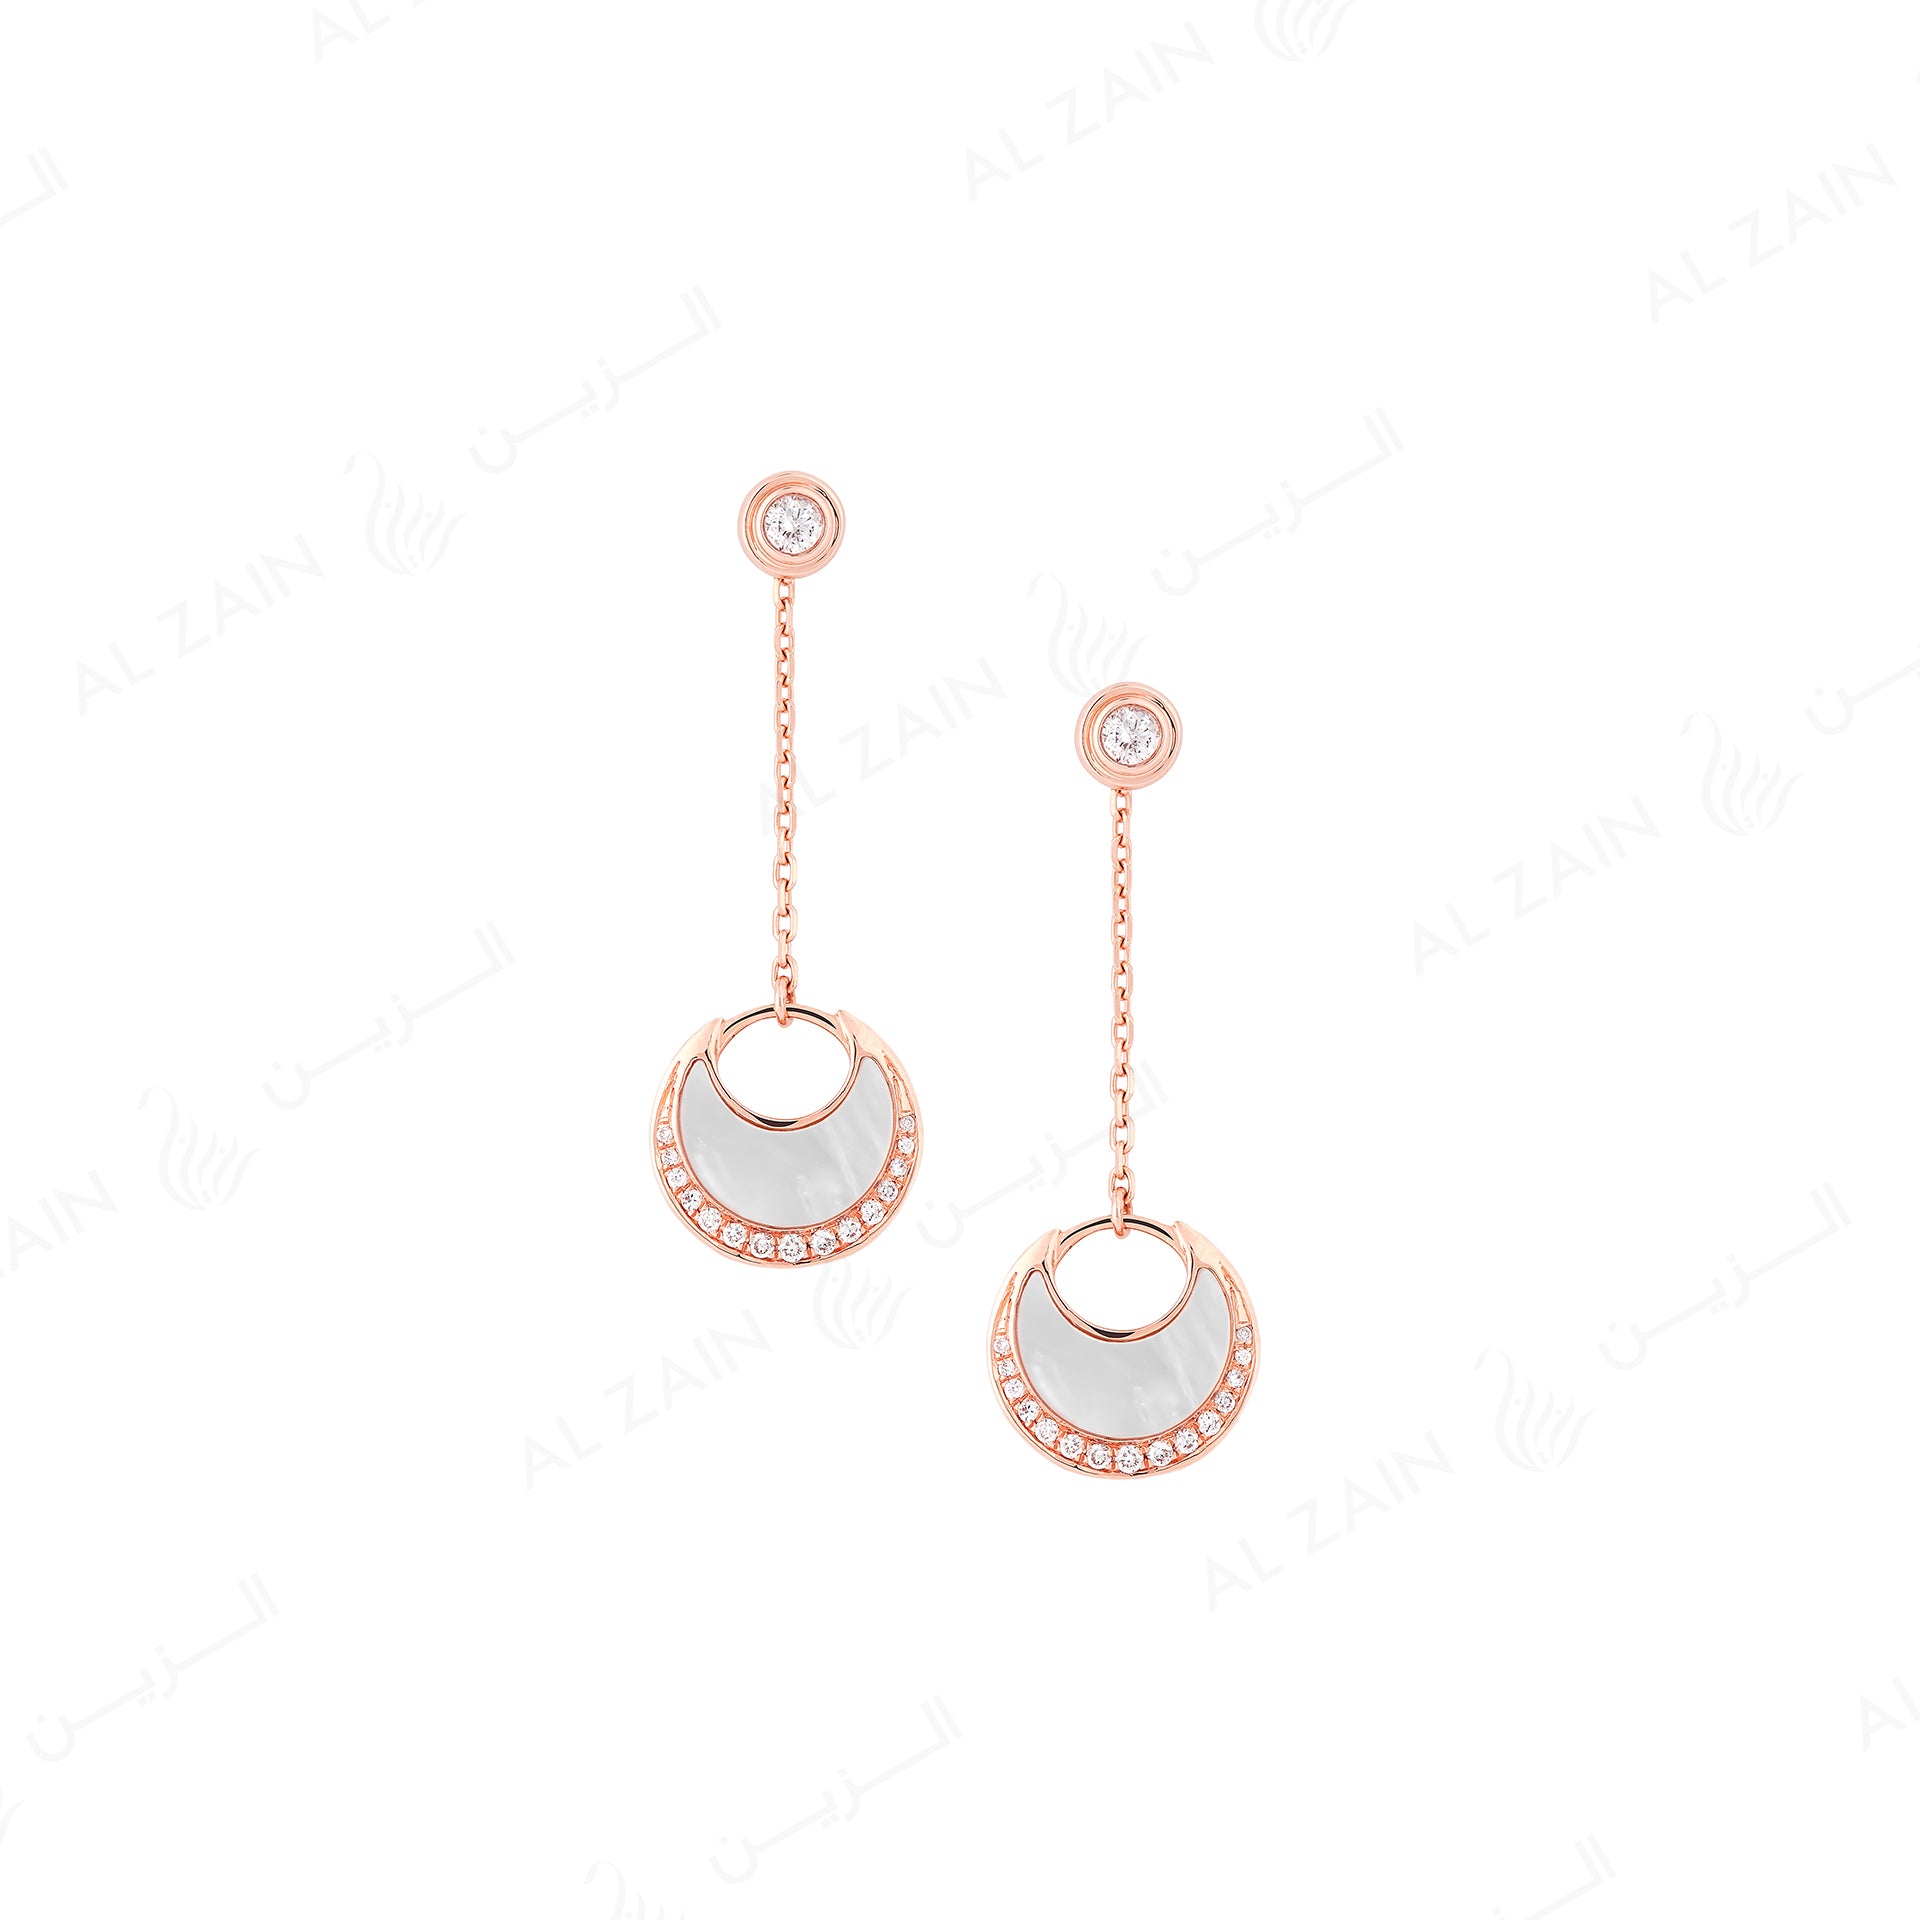 Al Hilal earrings in rose gold with mother of pearl stone and diamonds